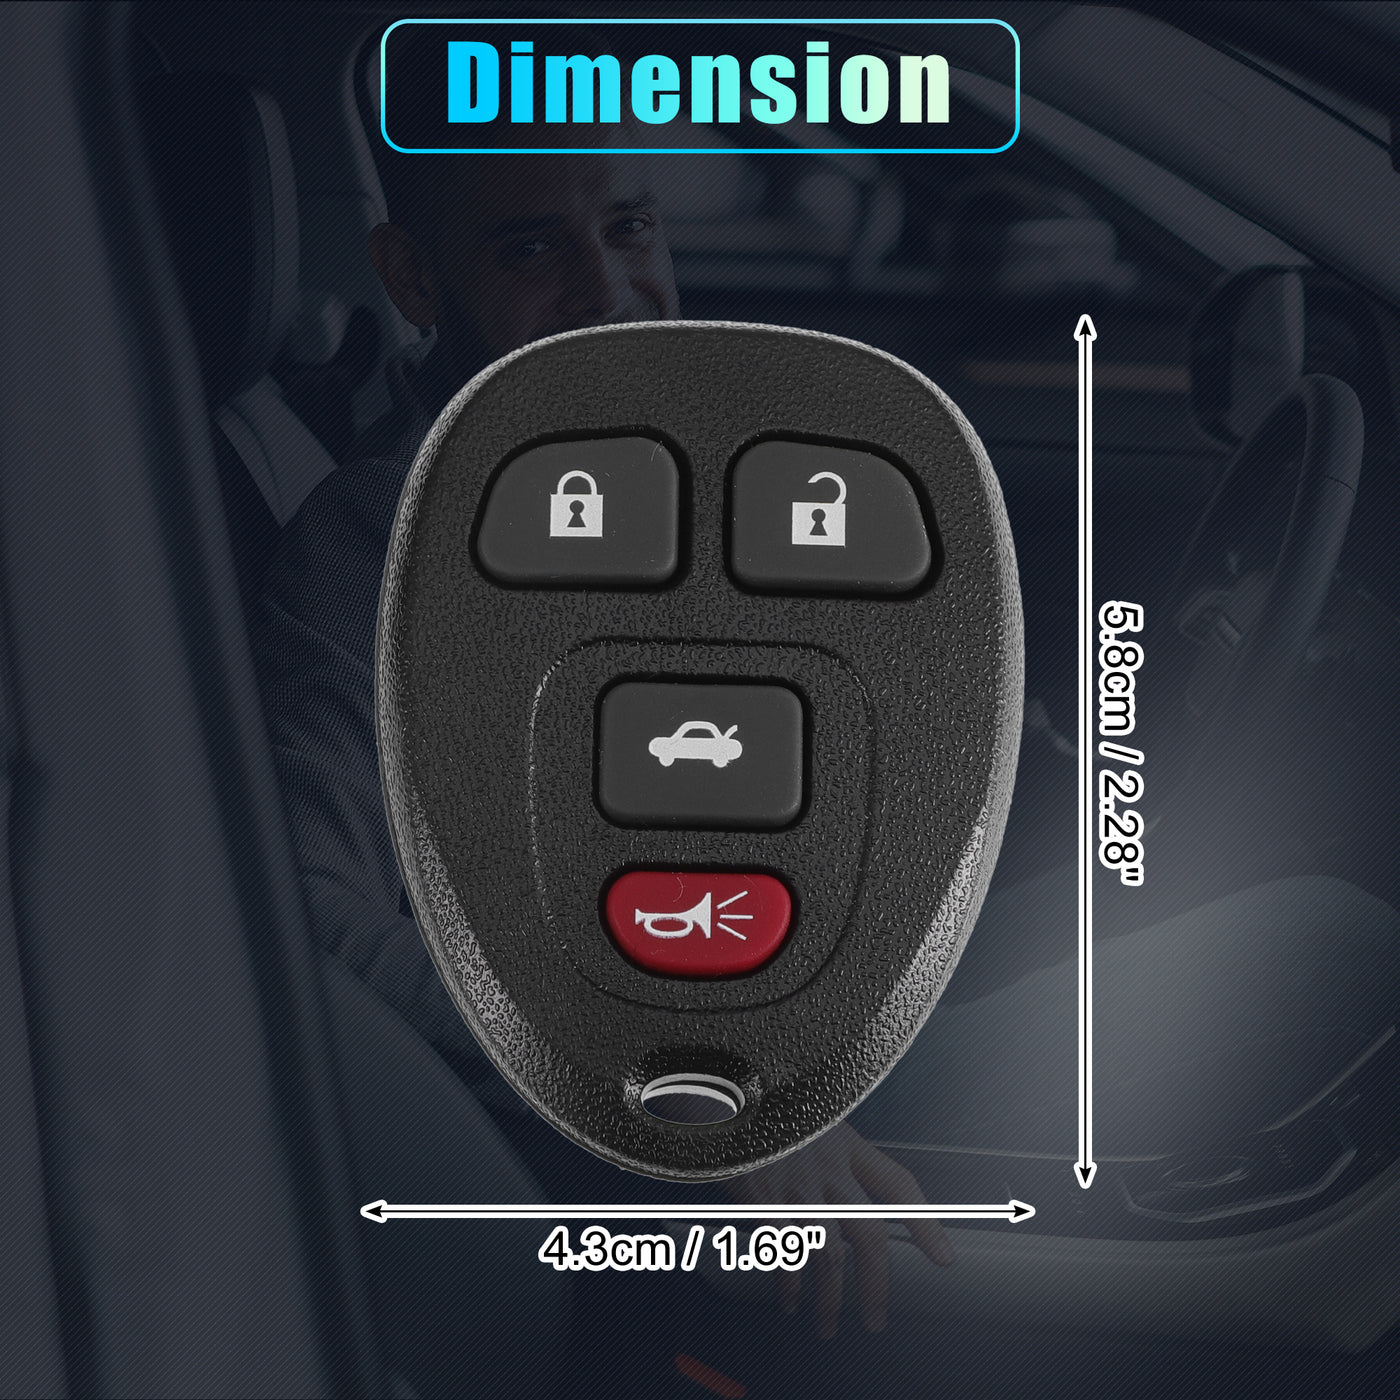 X AUTOHAUX OUC60270 315MHz Replacement Keyless Entry Remote Ignition Transponder Key Fob for Chevrolet Silverado for GMC Sierra 1500 2500 3500 2008-2014 OUC60270 OUC60221 4 Buttons